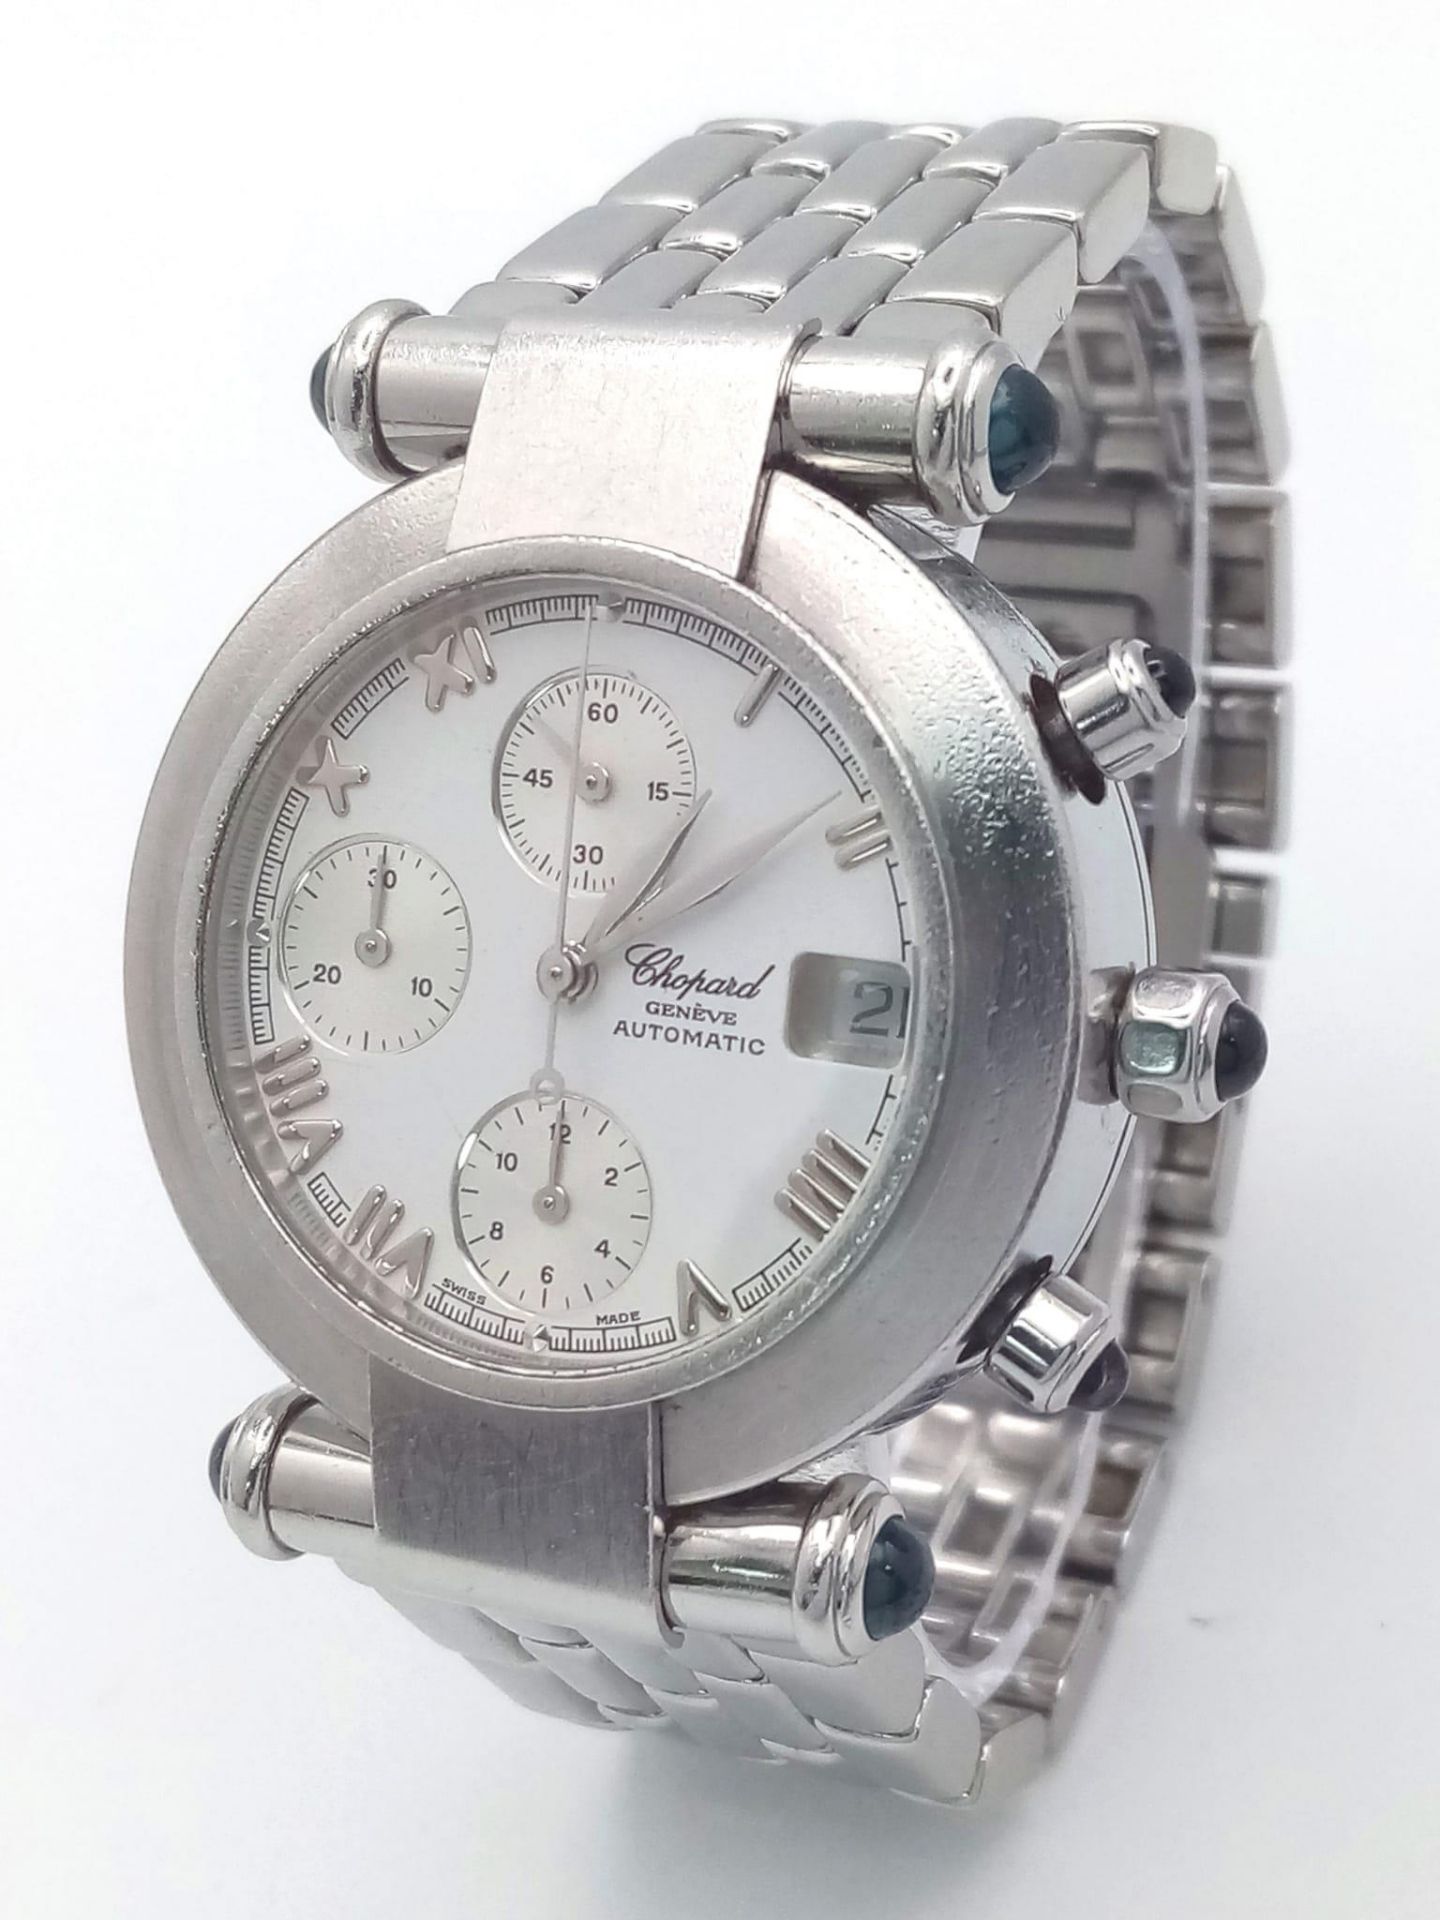 A Chopard Automatic Chronograph Gents Watch. Stainless steel bracelet and case - 37mm. White dial - Bild 2 aus 8